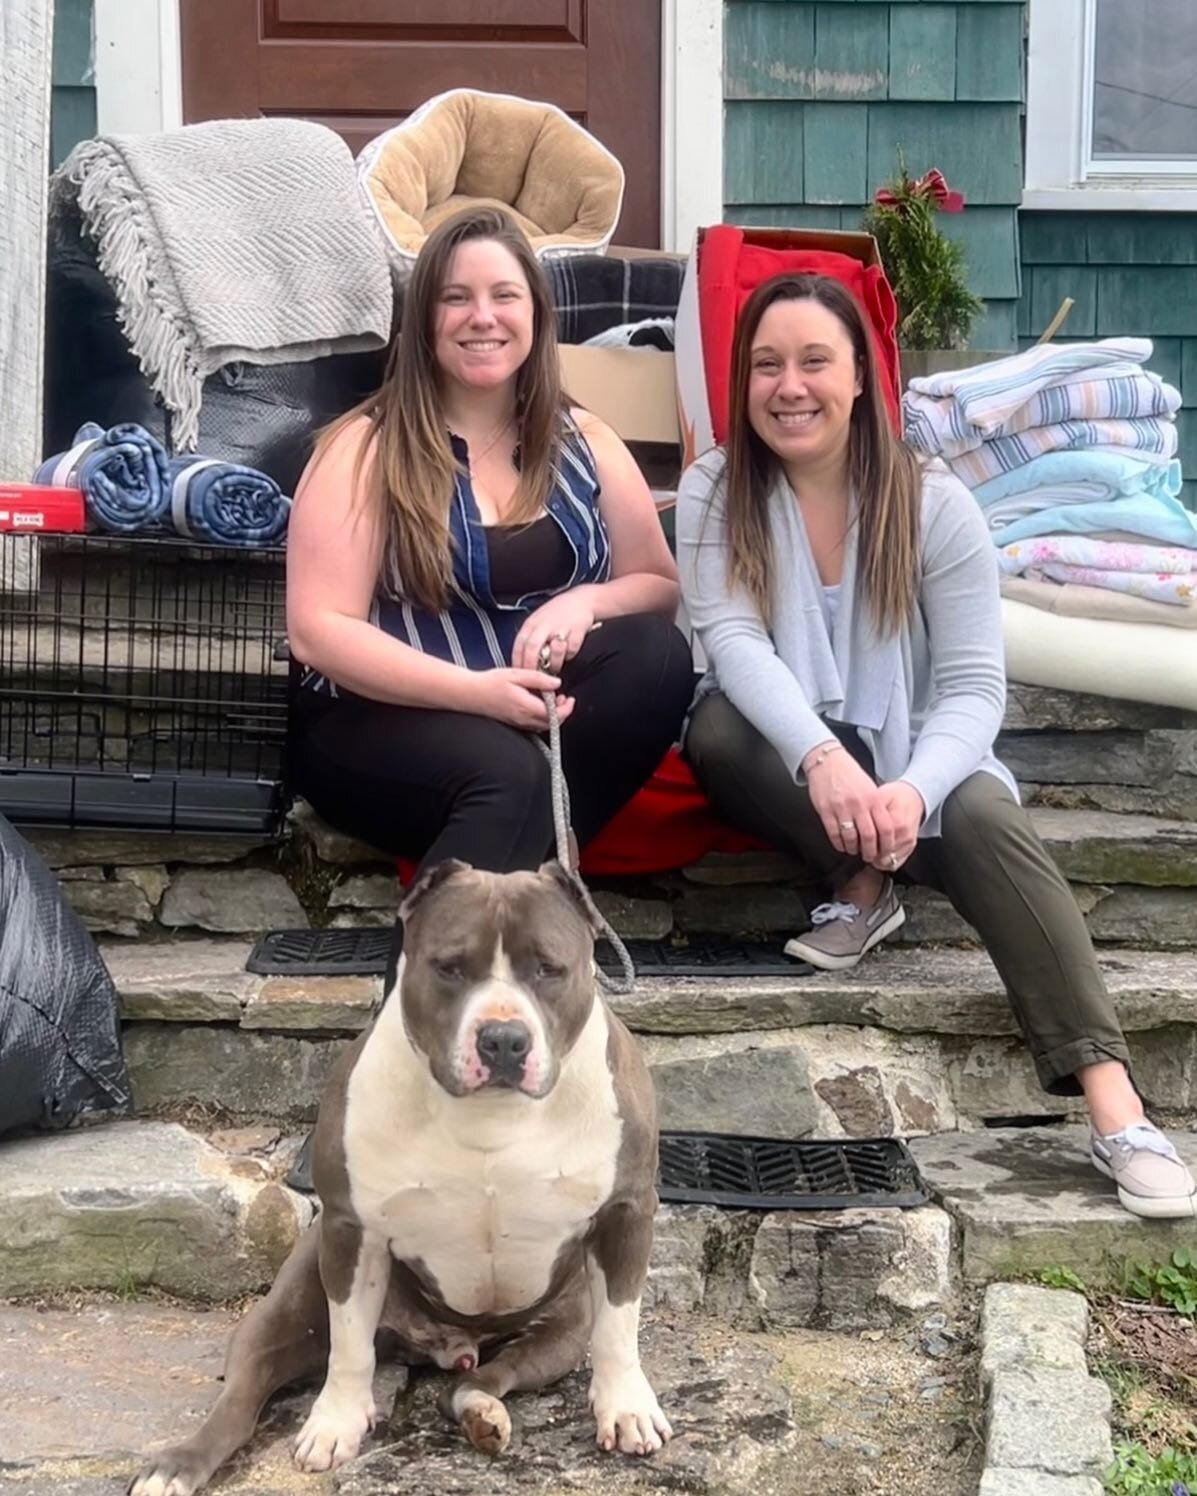 A special thank you to Dexter-Russell Inc! They organized a donation drive on behalf of the rescue! Their incredible staff dropped off blankets, treats, beds &amp; toys! We value + appreciate your local support!